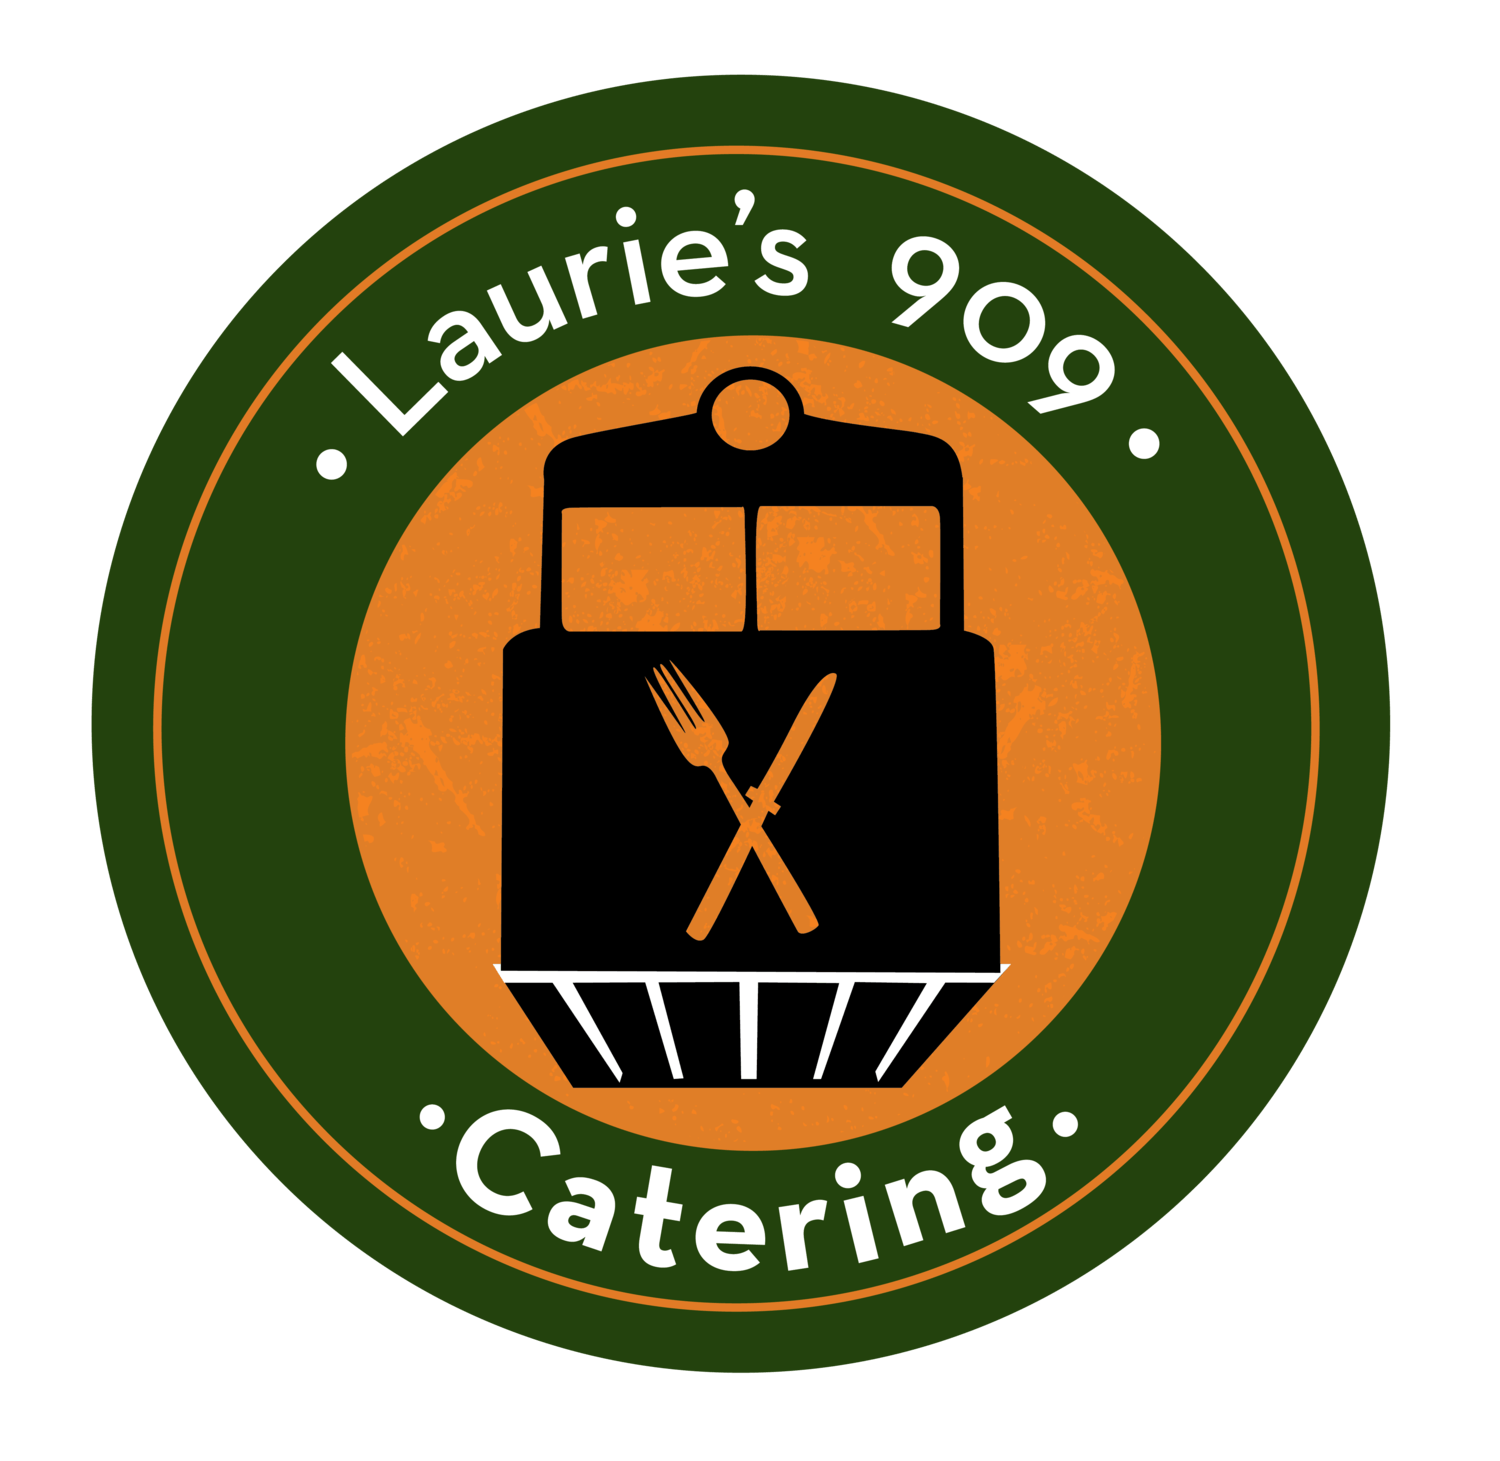 909 Logo - Laurie's 909 Catering